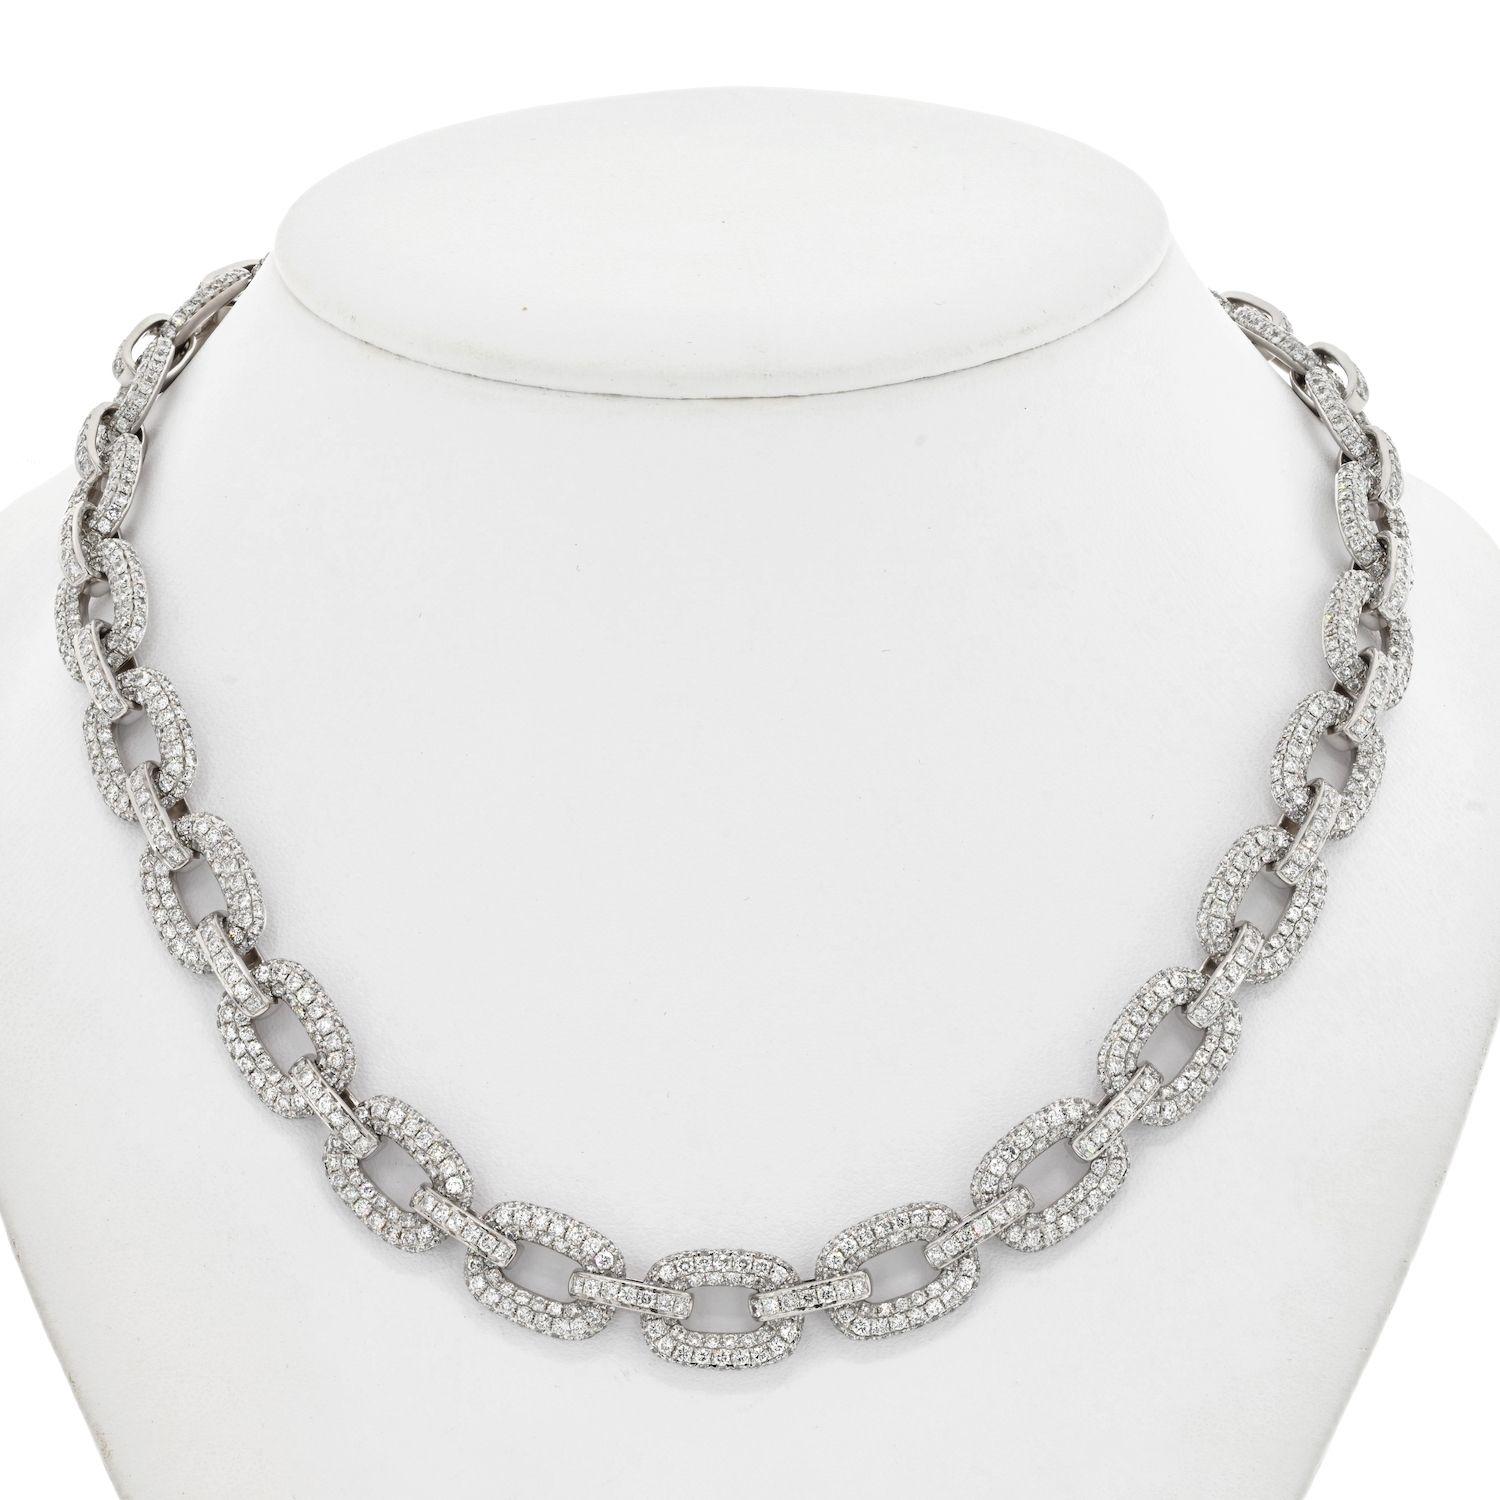 Modern diamond link necklace made in 18K white gold mounted with round cut diamonds. Each link has somewhat of a bombe dome design and flat on the side where it touches the skin. 
Comfortable and light an excellent way to sparkle up your outfit, and